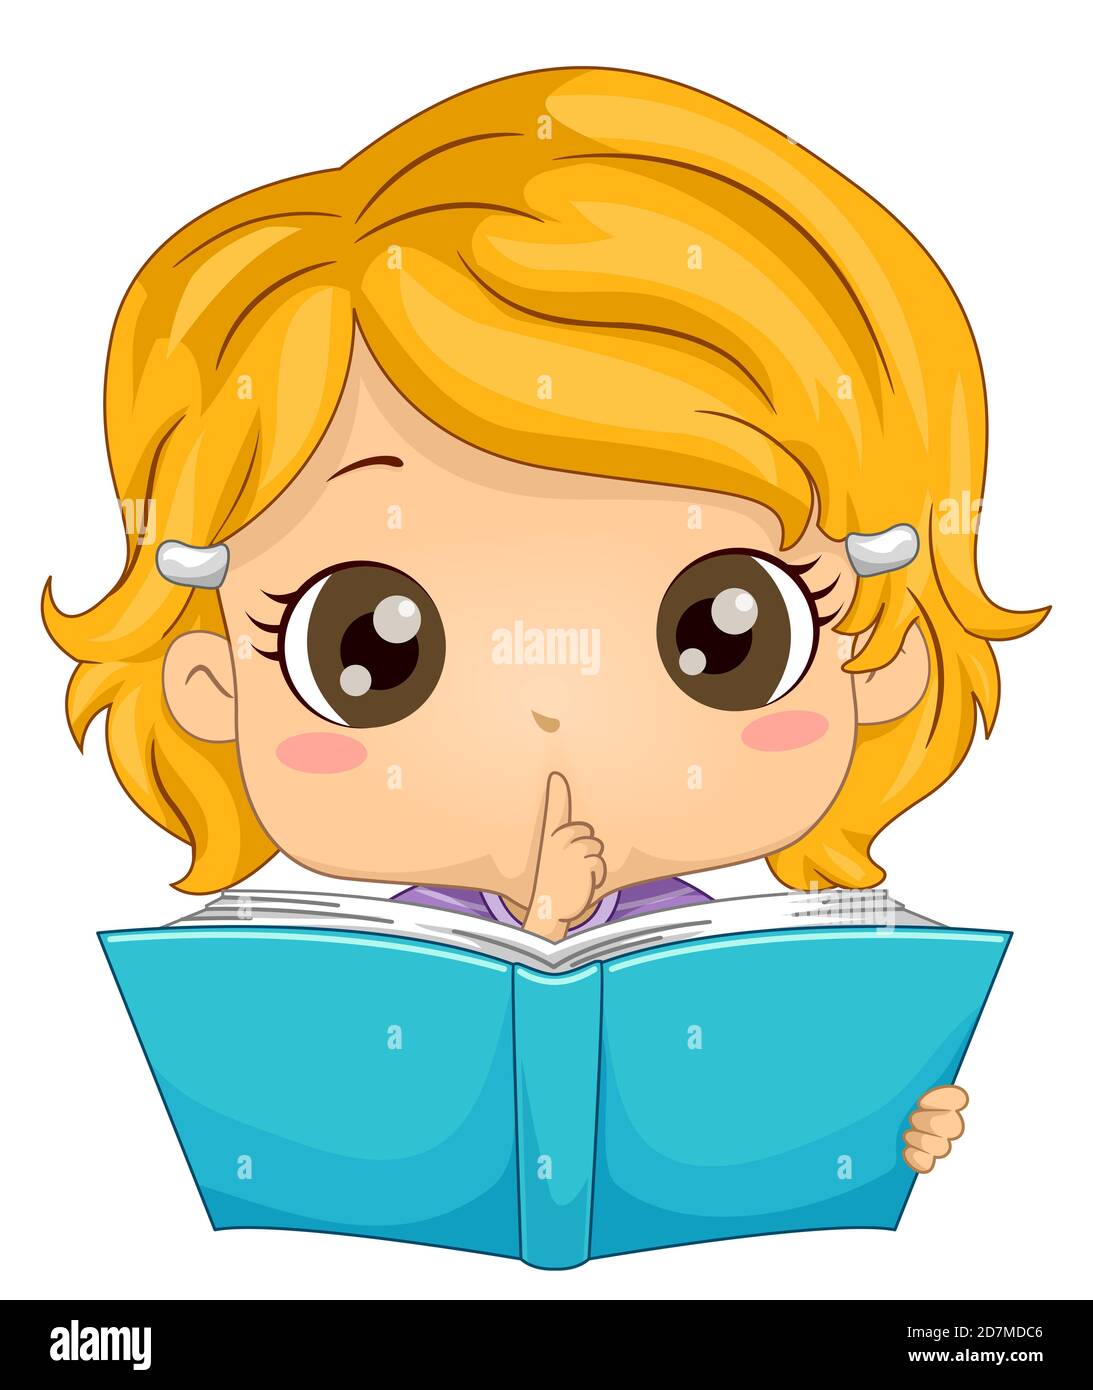 Illustration of a Kid Girl Gesturing Silence and Reading a Book Stock Photo